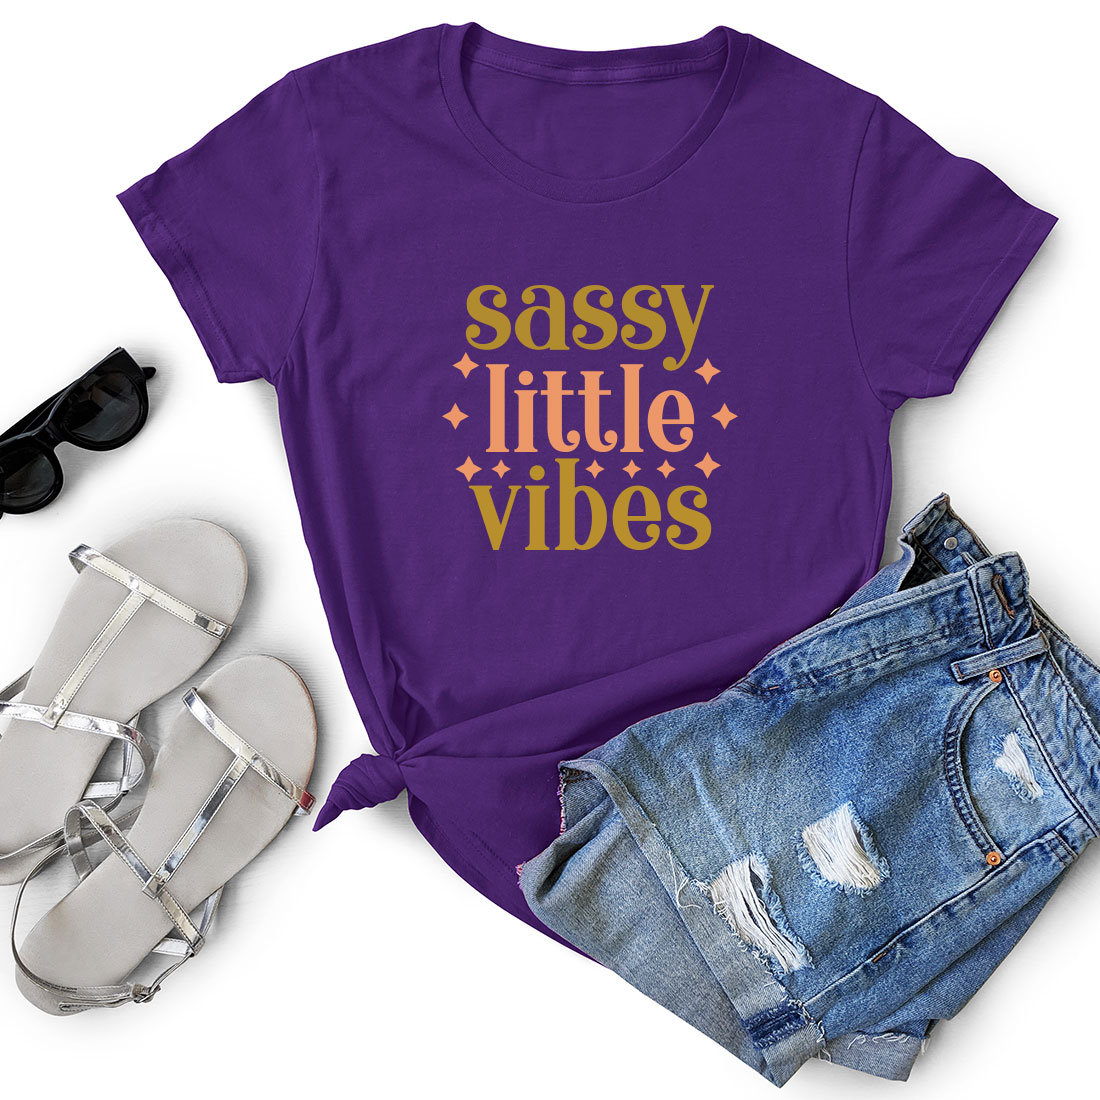 T - shirt that says sassy little vibes next to a pair of.